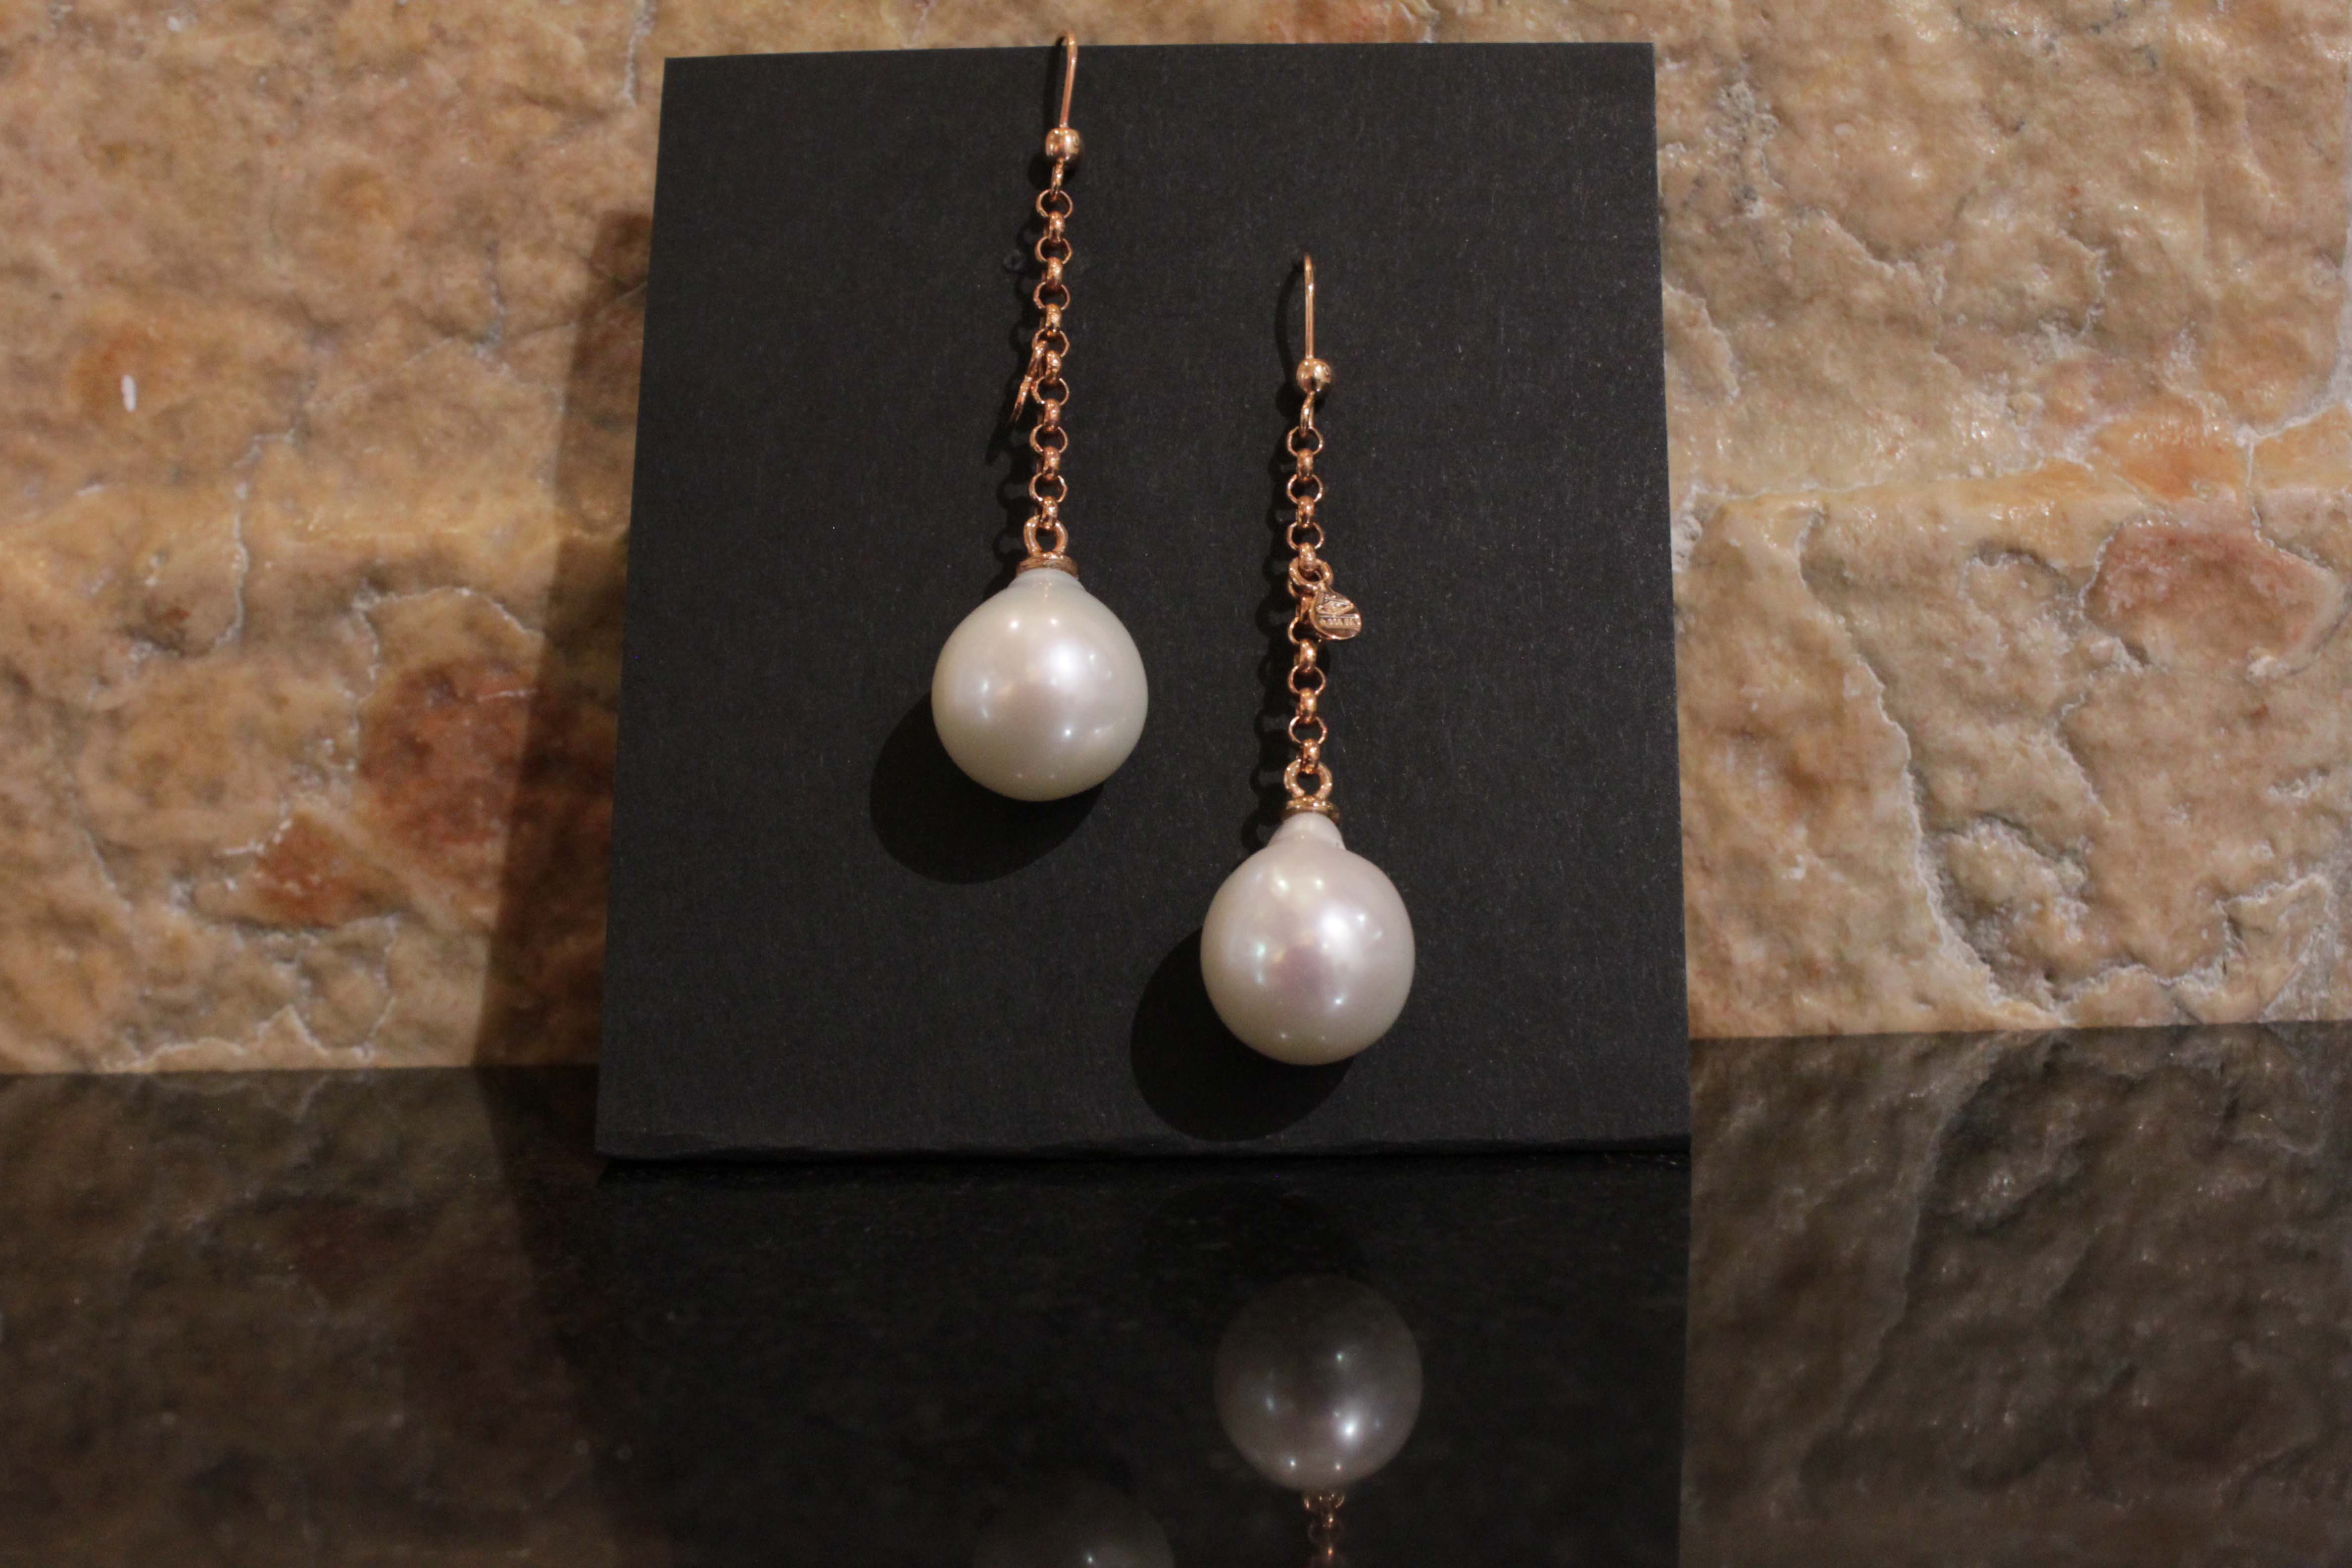 Rose gold pendant earrings with fresh water pearls